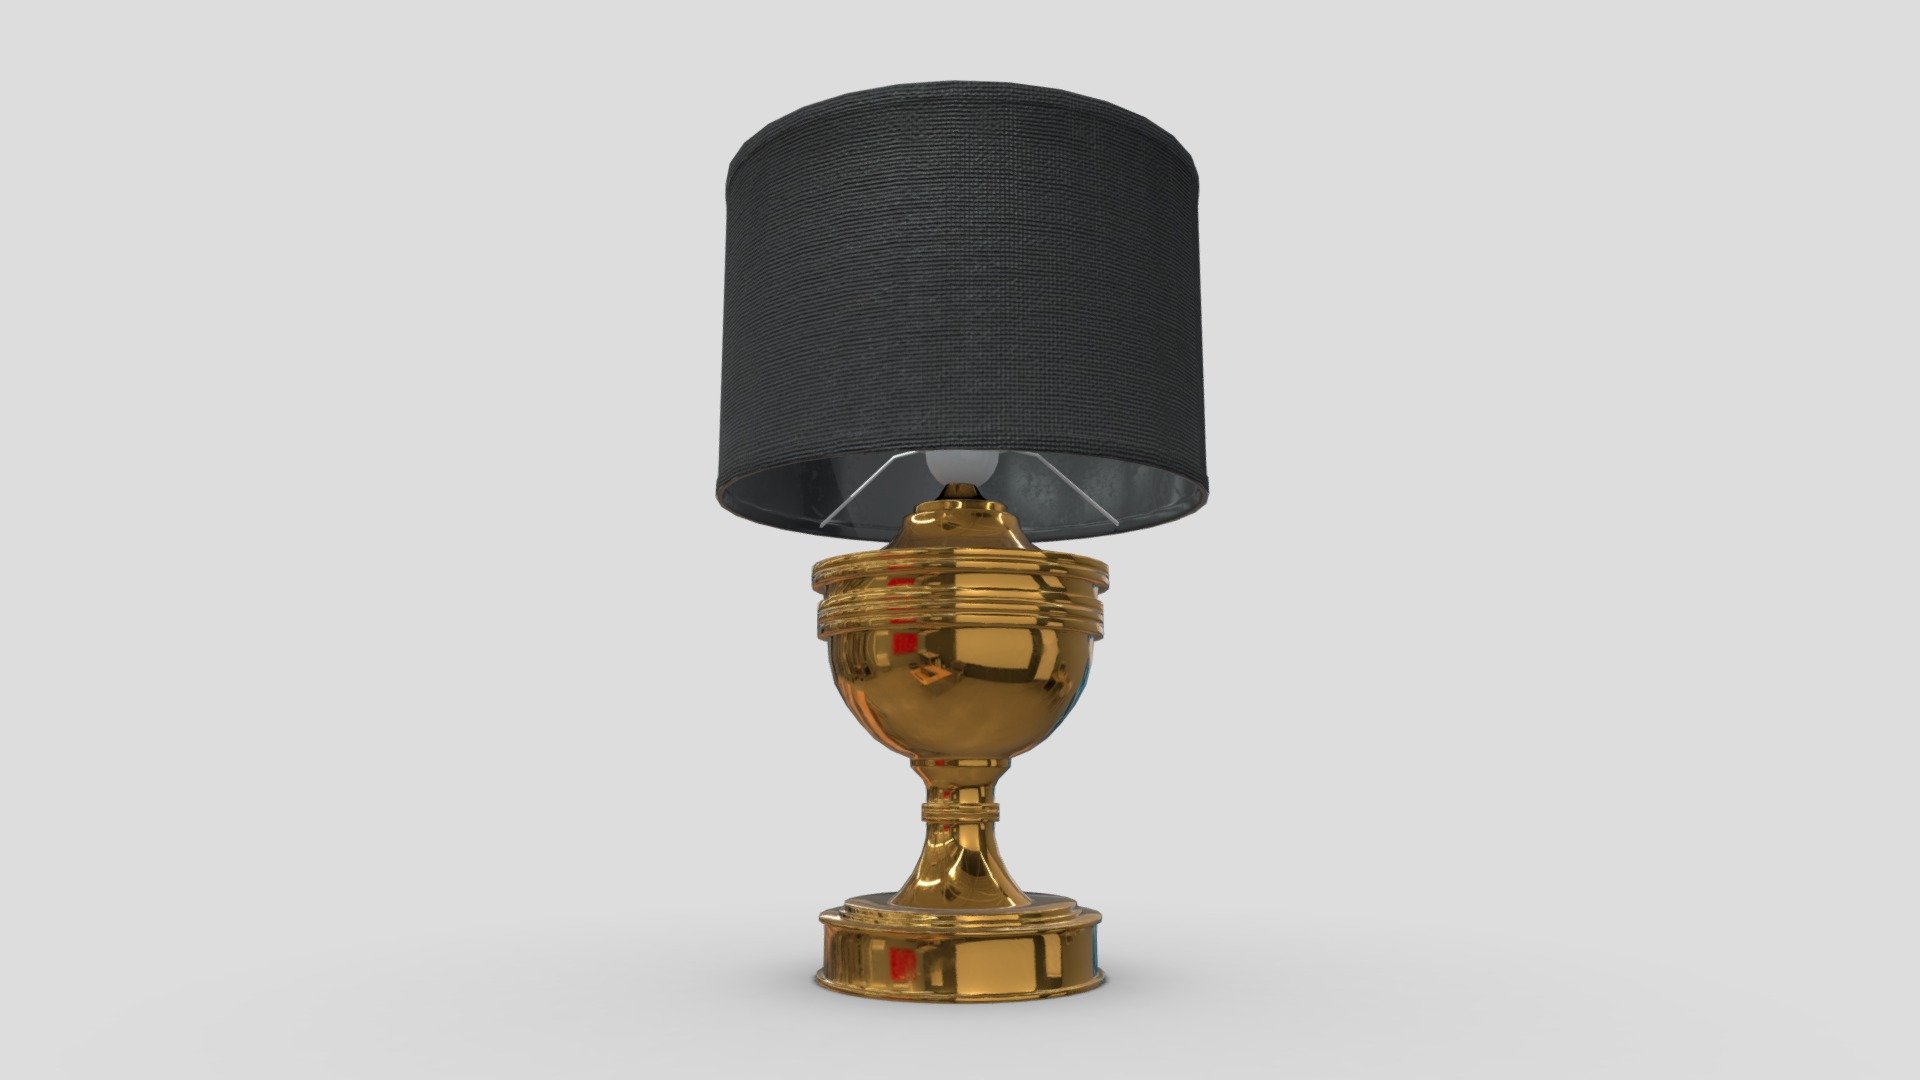 ‘It’s kind of like a trophy, but this illuminate in the visual sphere!’

● 2048 x 2048 PBR textures

● normal map is baked from the high poly model

If you need help with this model or have a question – please do not hesitate to contact me. I will be happy to help you 3d model